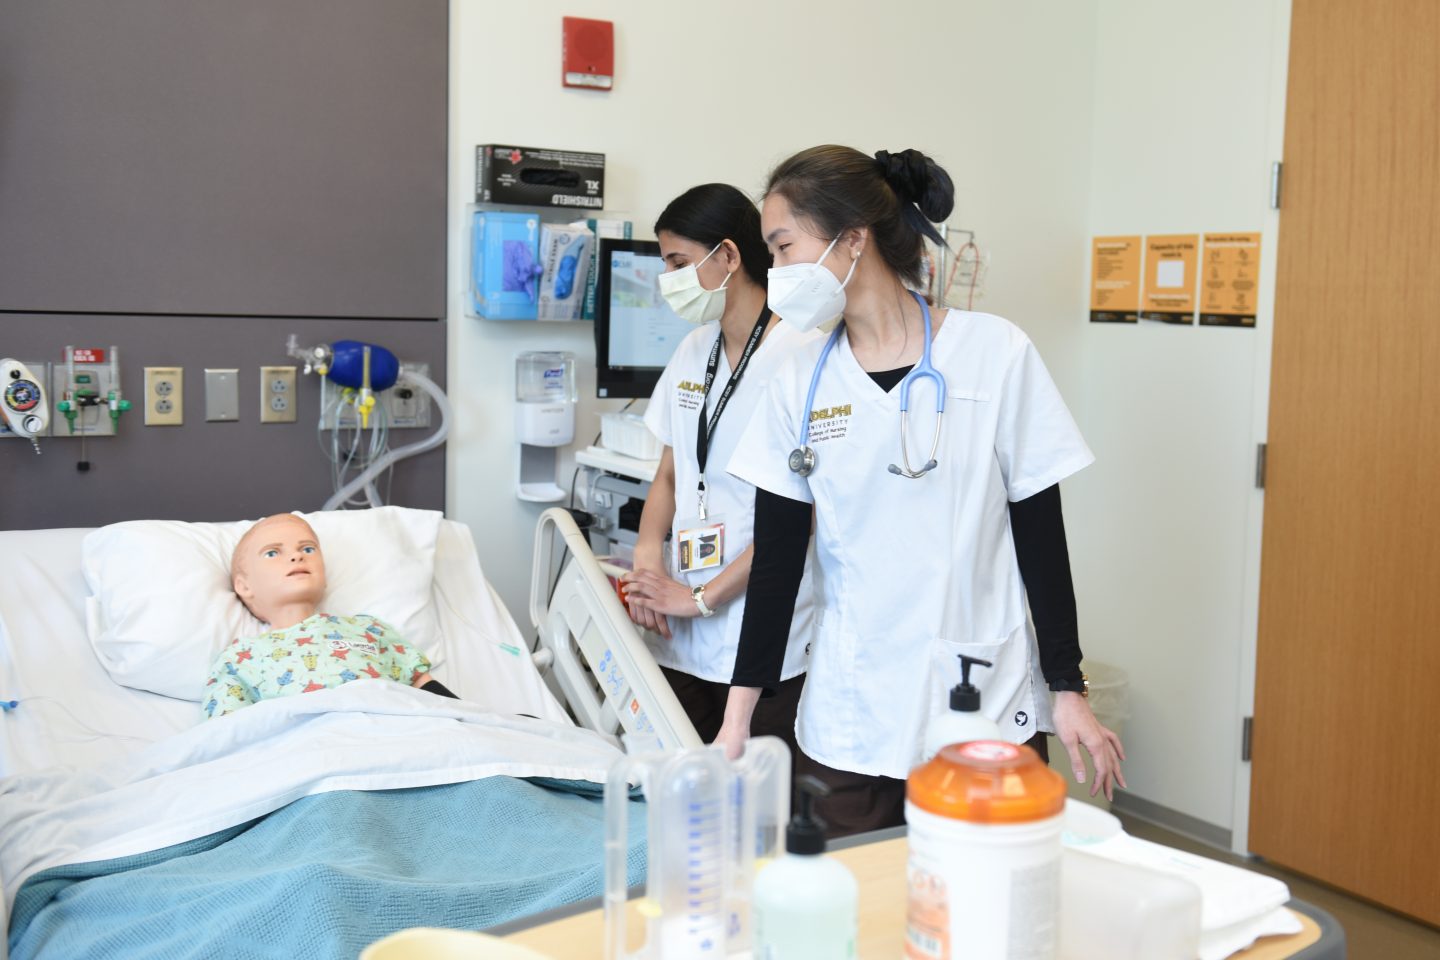 Faculty use this pediatric manikin to train their students in everything from routine to emergency experiences. When used with an obesity suit, the manikin enables nurses to learn about the treatment of child obesity, a growing problem in the 6-to-9 age bracket.